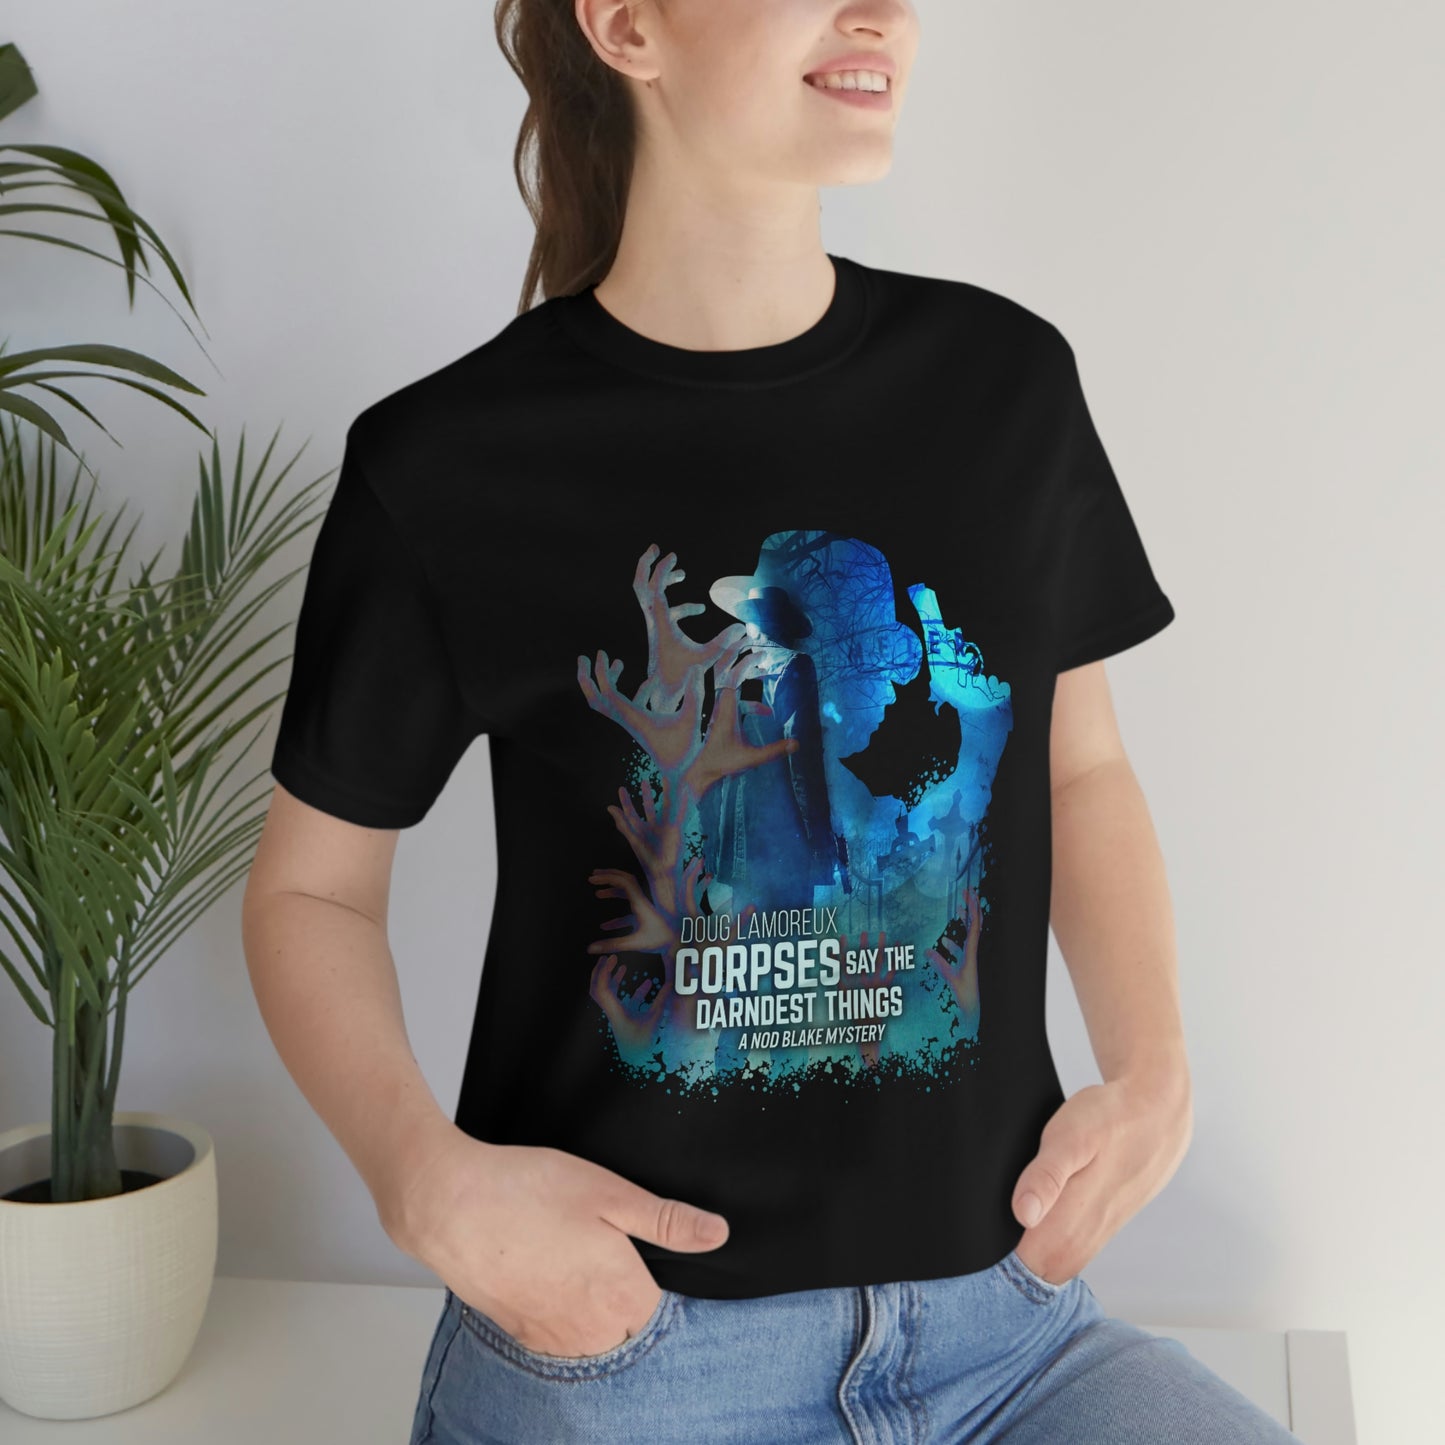 Corpses Say The Darndest Things - Unisex Jersey Short Sleeve T-Shirt